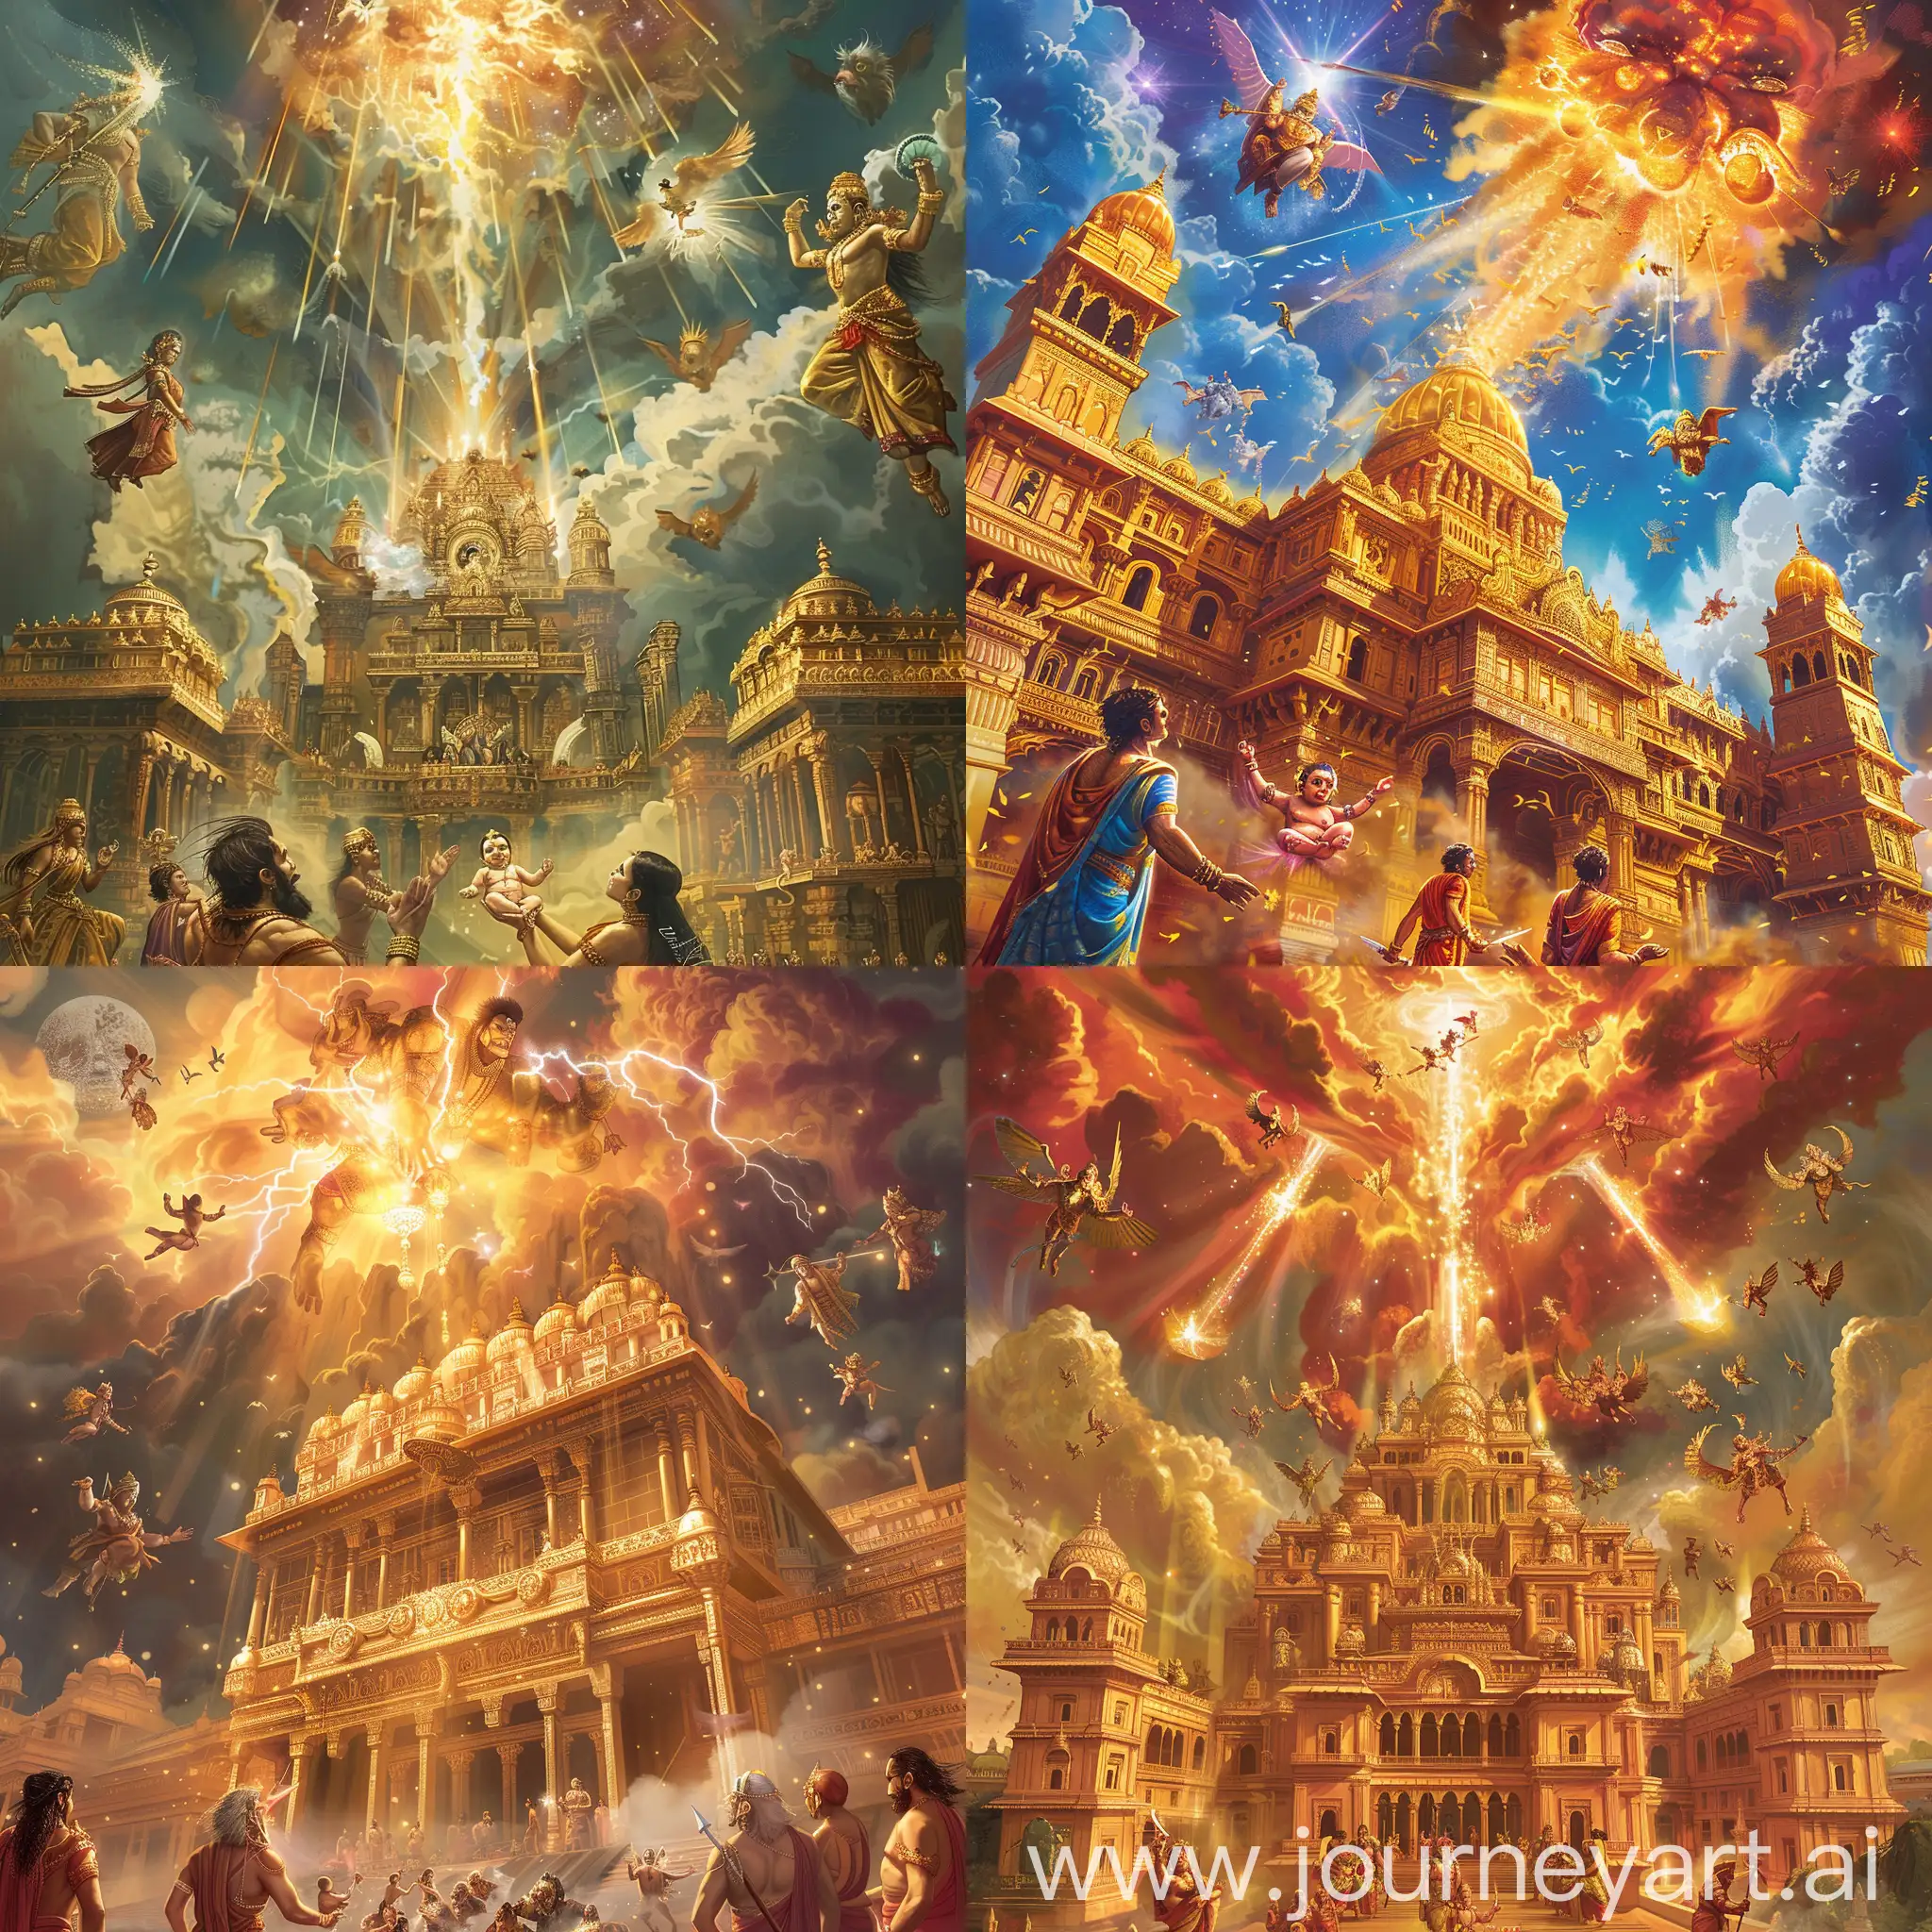 **Text:** "In the golden city of Lanka, a mighty warrior was born to the demon king Ravana and his queen Mandodari. He was named Meghanada, meaning 'Thunderous Roar.'"  **Illustration:** A magnificent palace in Lanka with baby Meghanada being blessed by celestial beings as the heavens roar above.